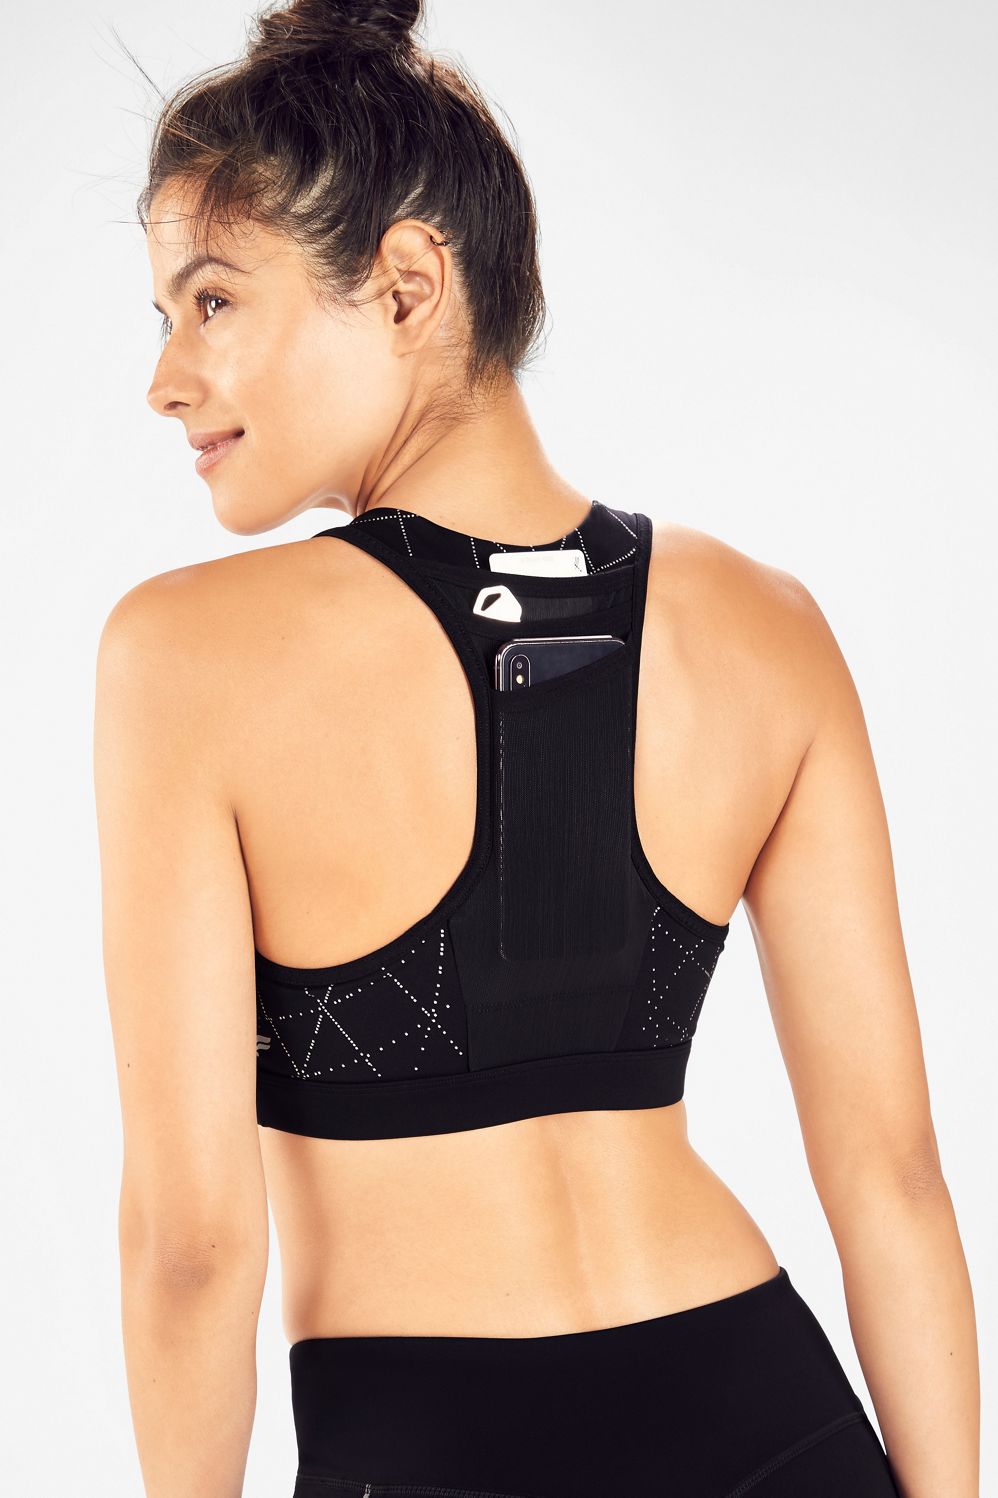 The most FLATTERING workout top everrrr (and the back is SO cute